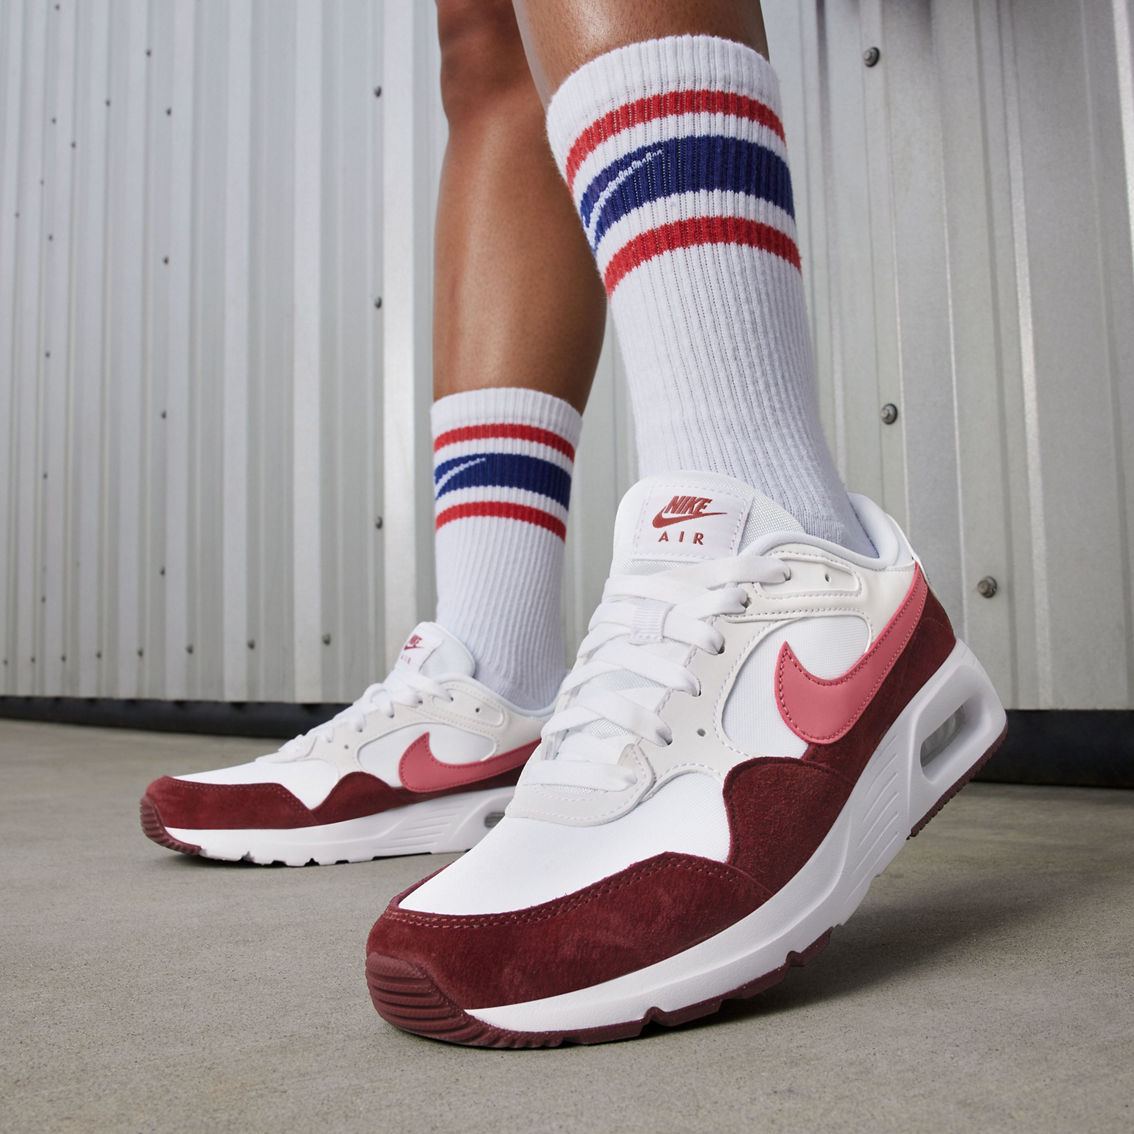 Nike Women's Air Max SC Shoes - Image 8 of 9